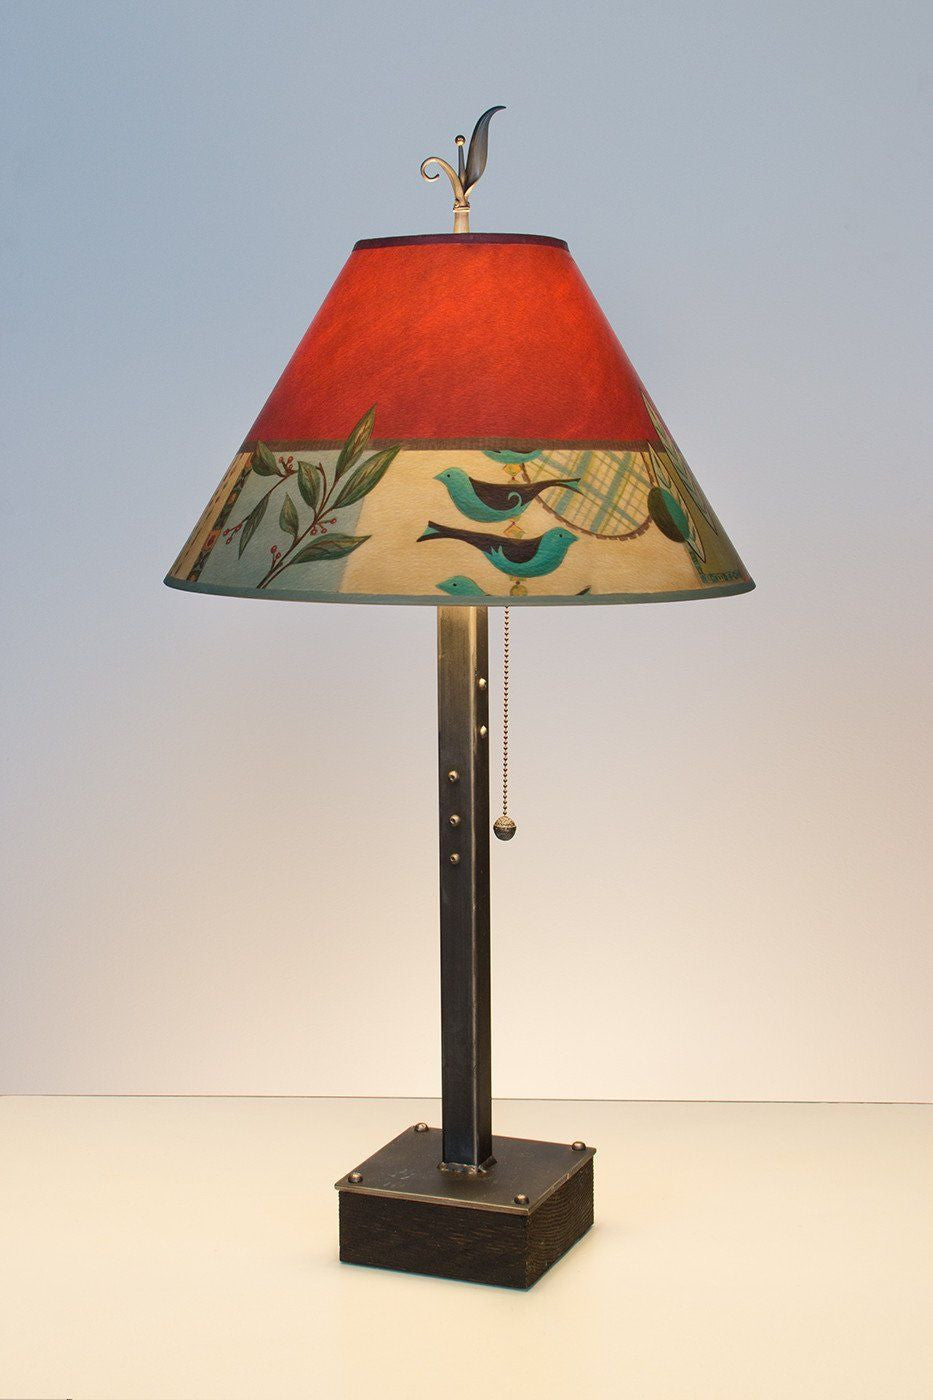 Janna Ugone & Co Table Lamps Steel Table Lamp on Wood with Medium Conical Shade in New Capri